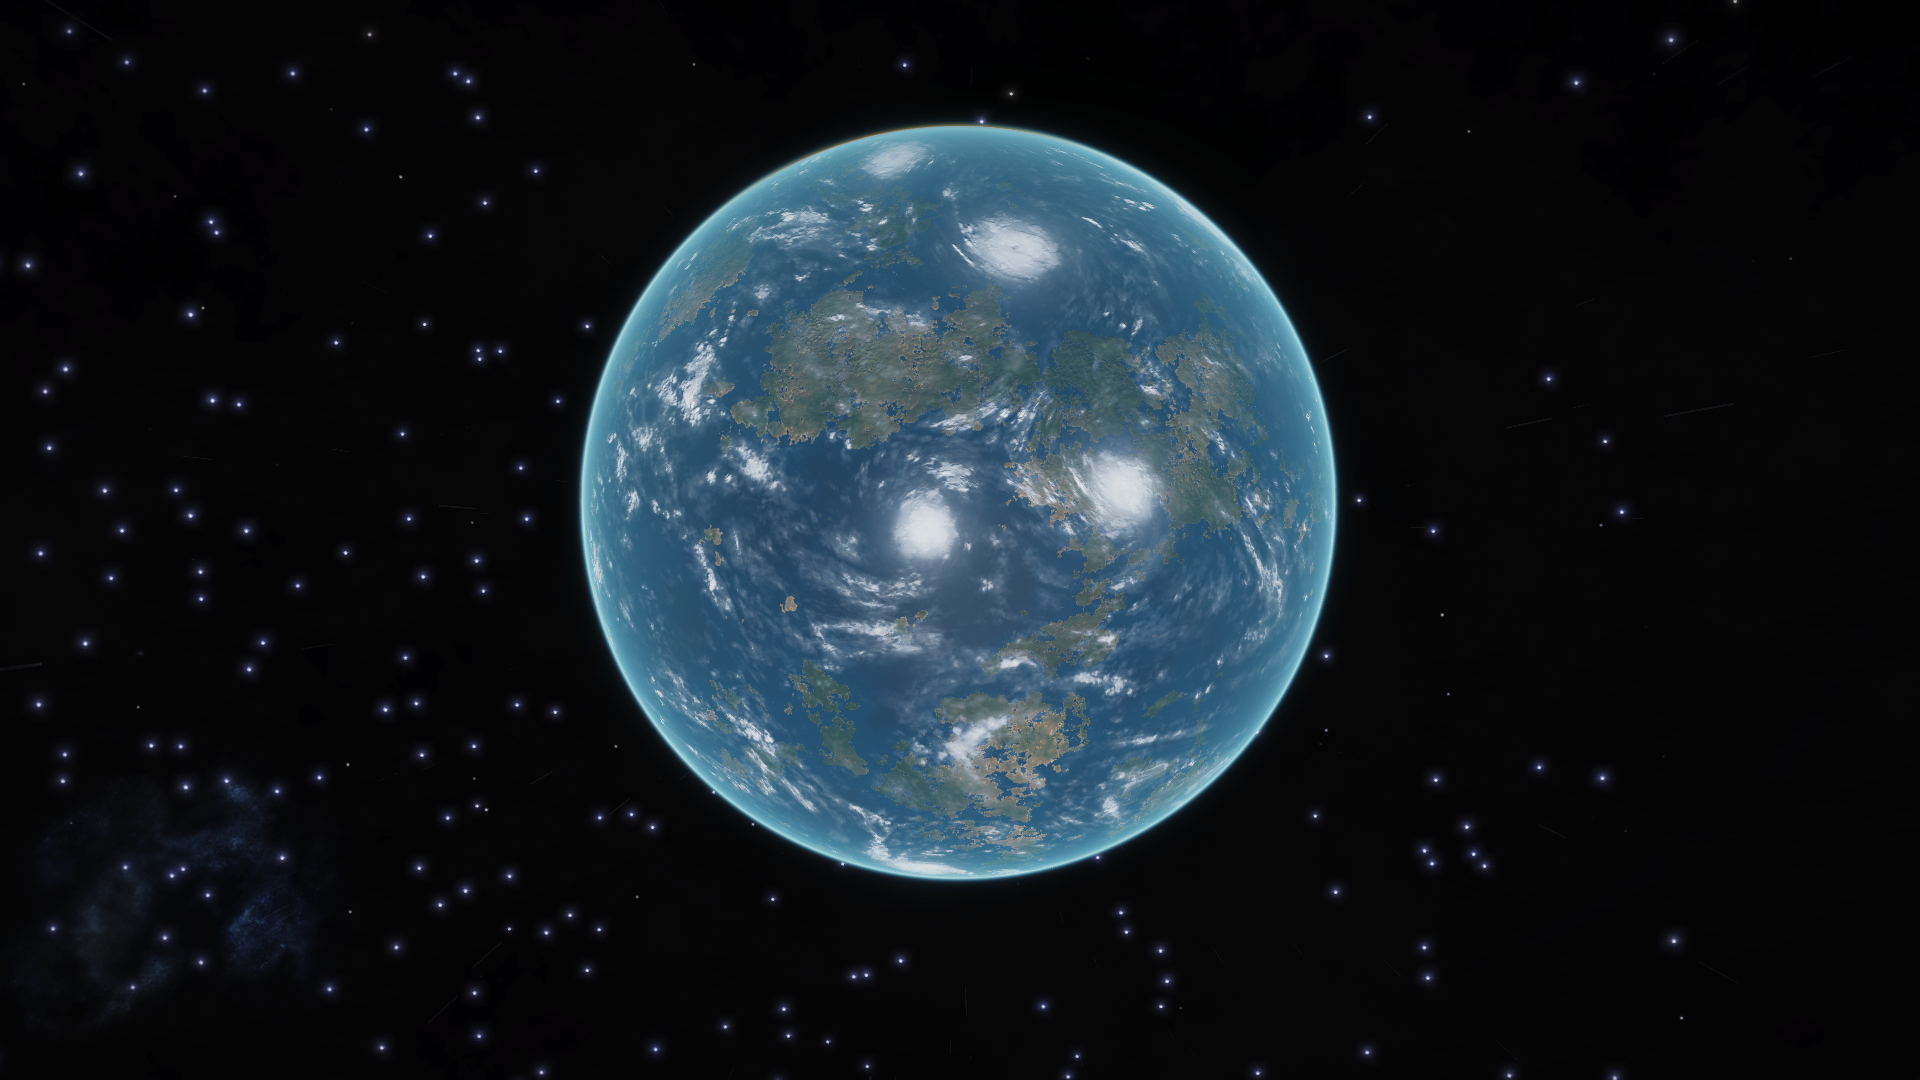 Finally another ELW